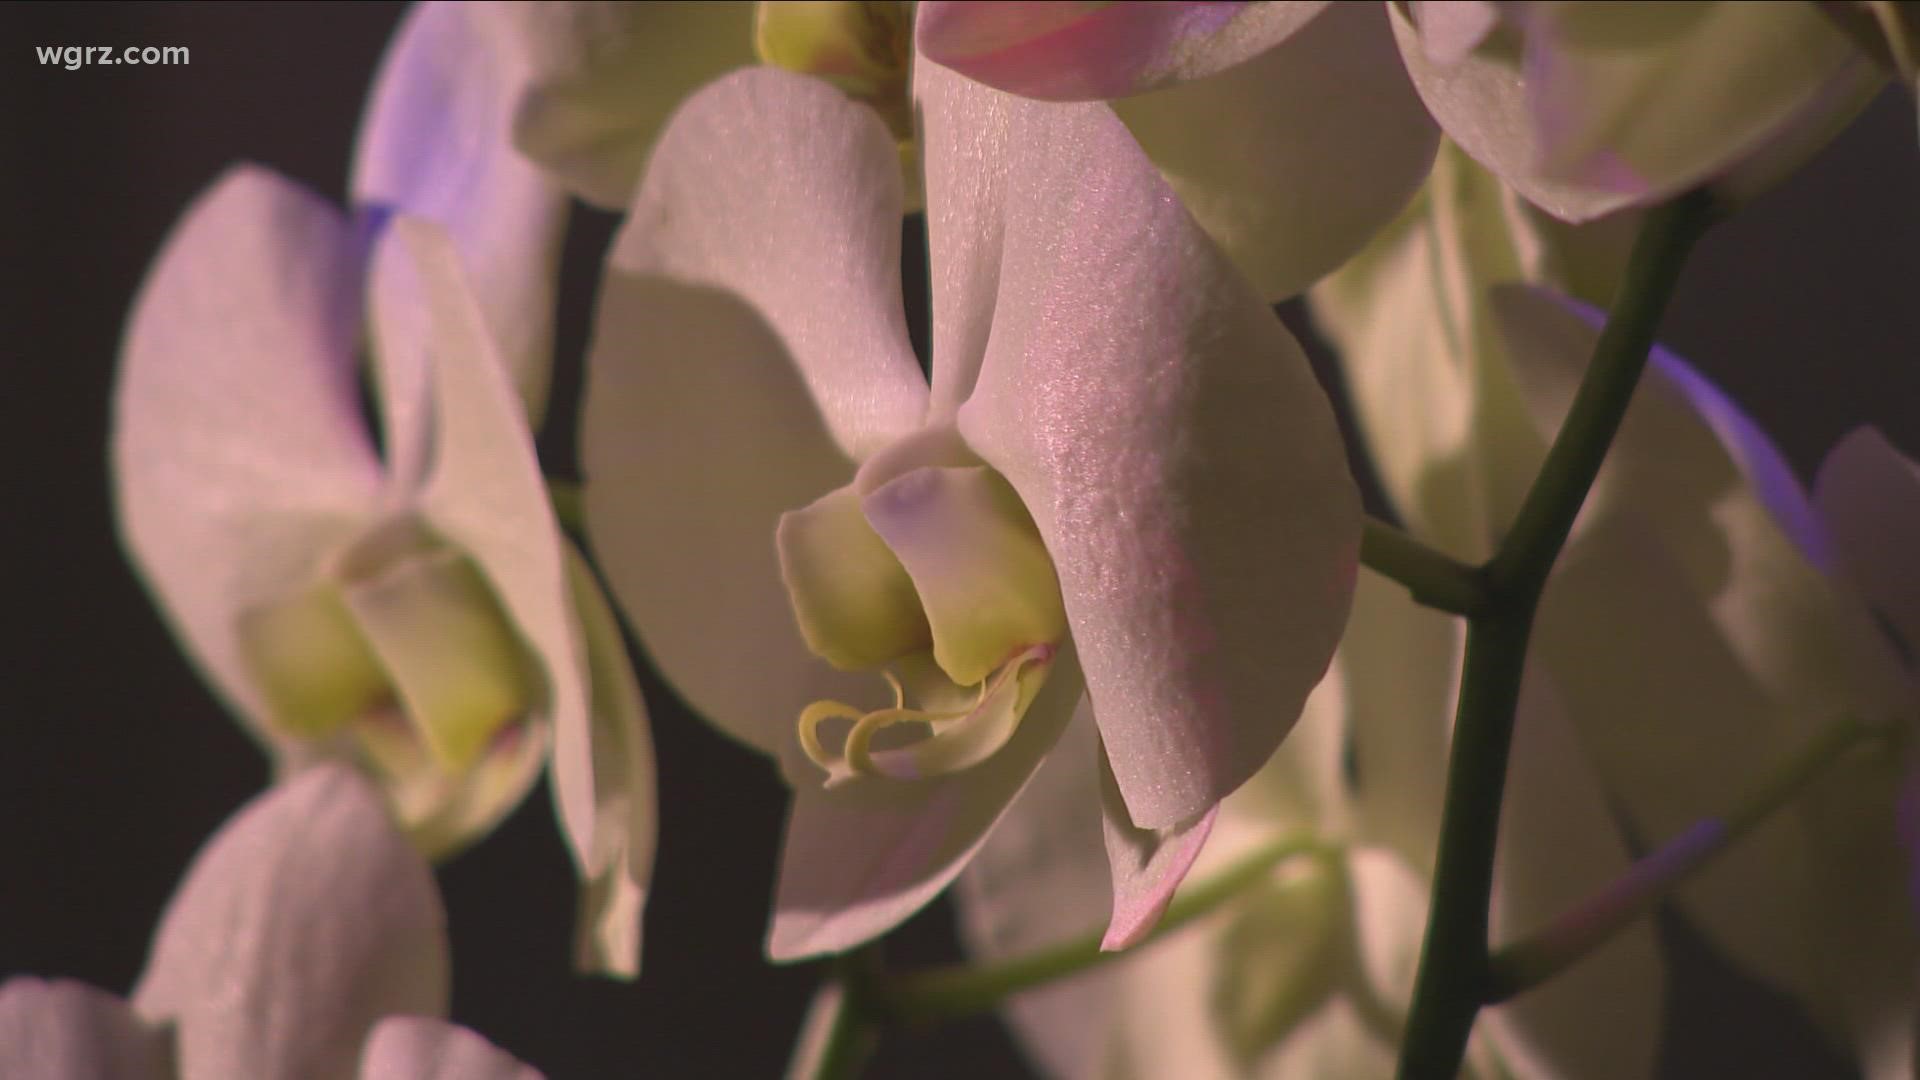 The gardens are filled with hundreds of hand-picked and award winning orchids. Organizers say they want to promote the culture of these unique flowers.